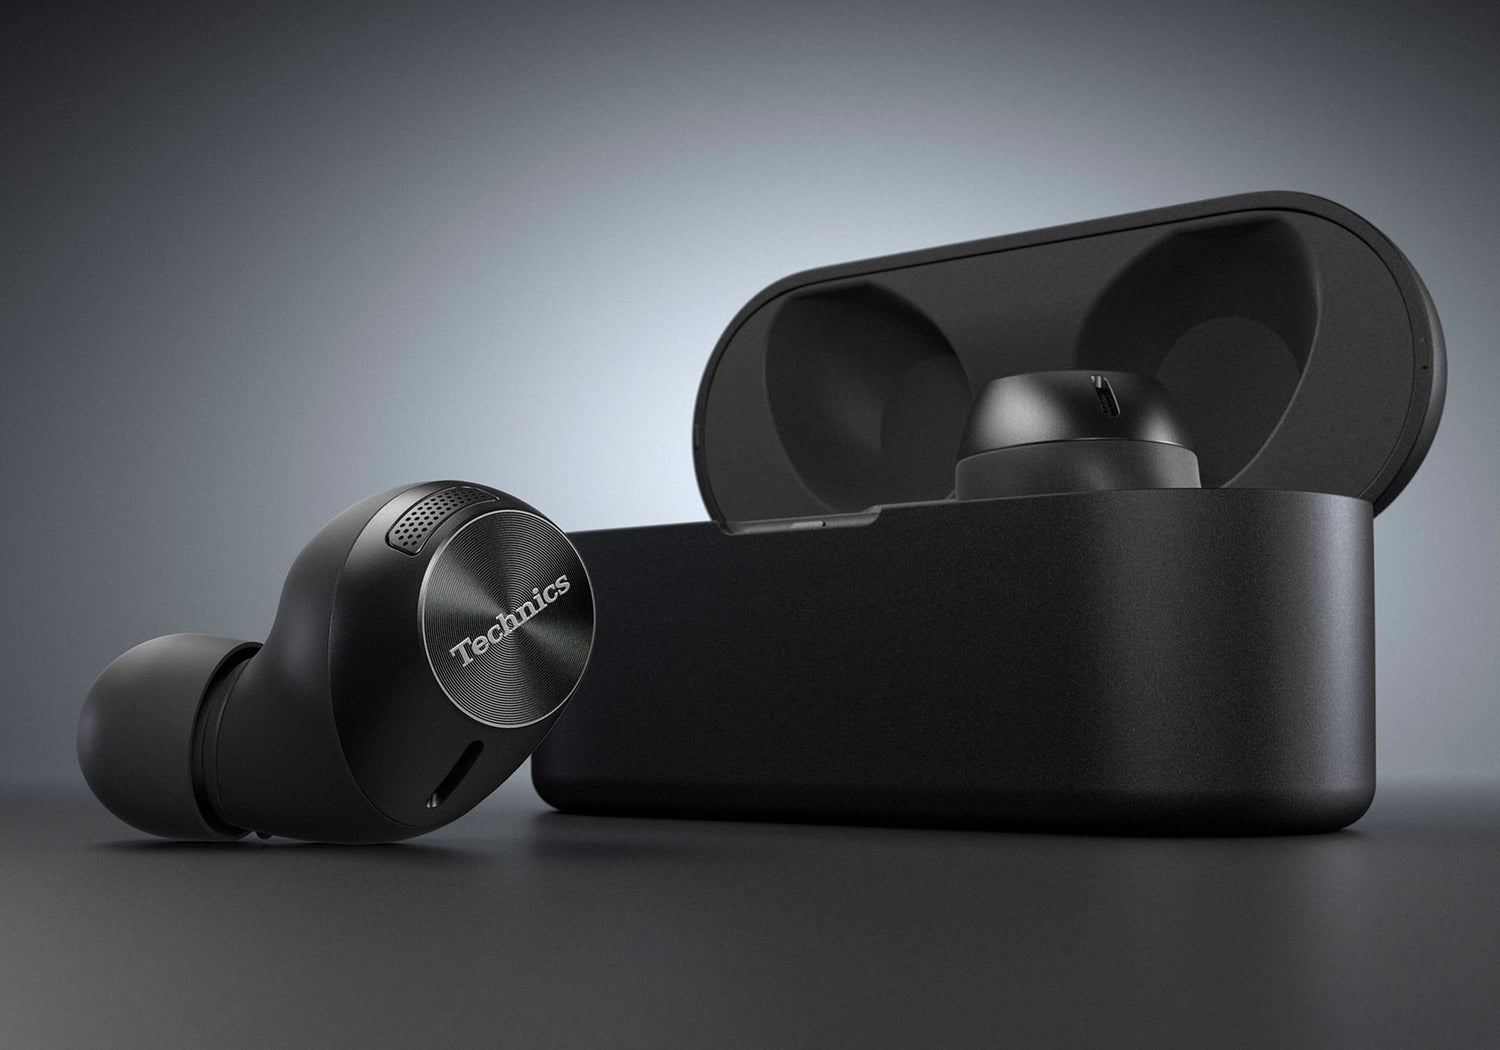 Technics Expands Its Portfolio of Next Generation True Wireless Earbuds with the New Compact and Lightweight EAH-AZ40M2